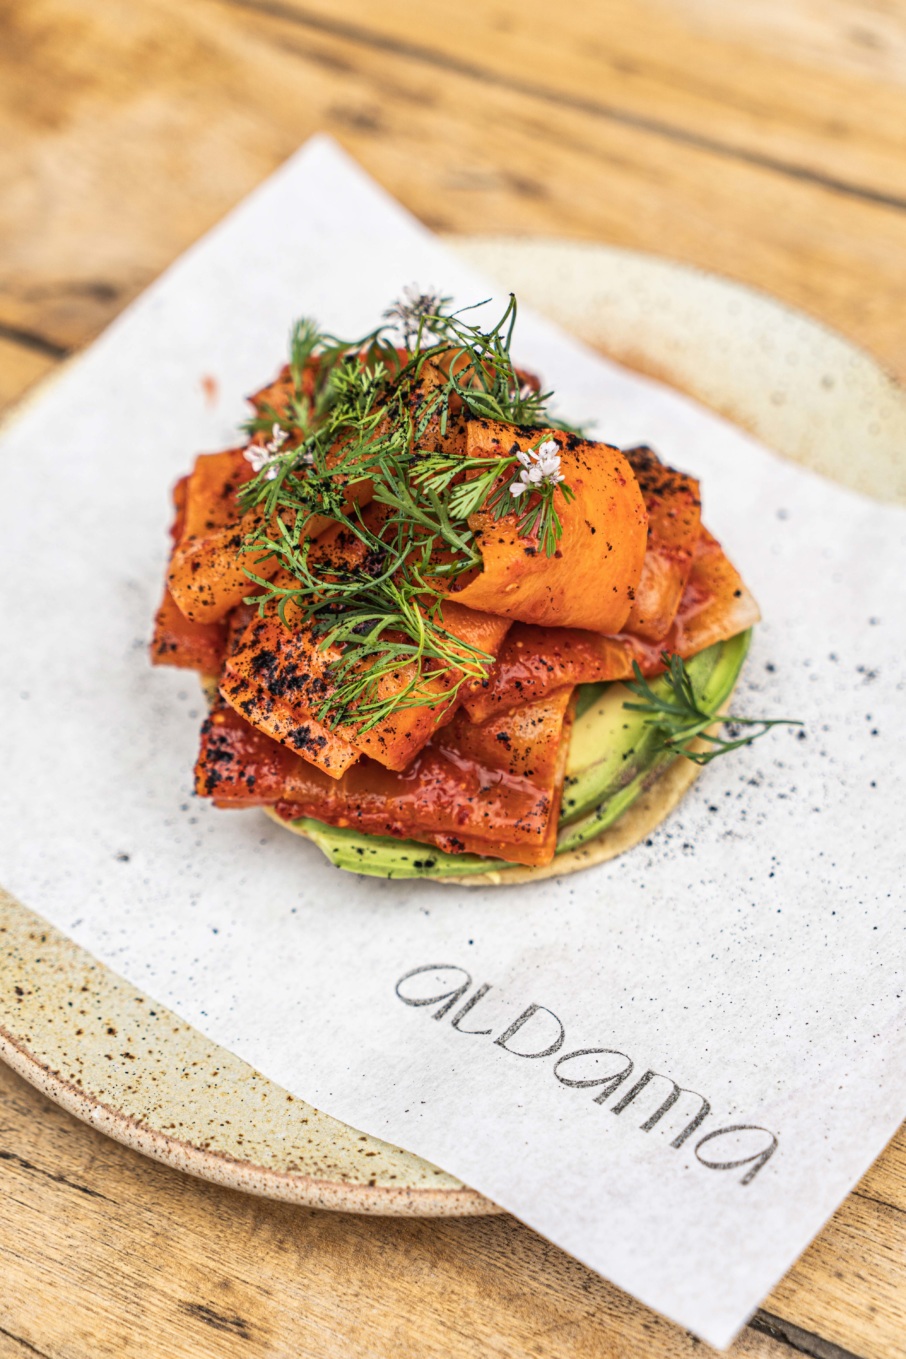 Aldama's daikon tostada with pickled daikon and carrots.